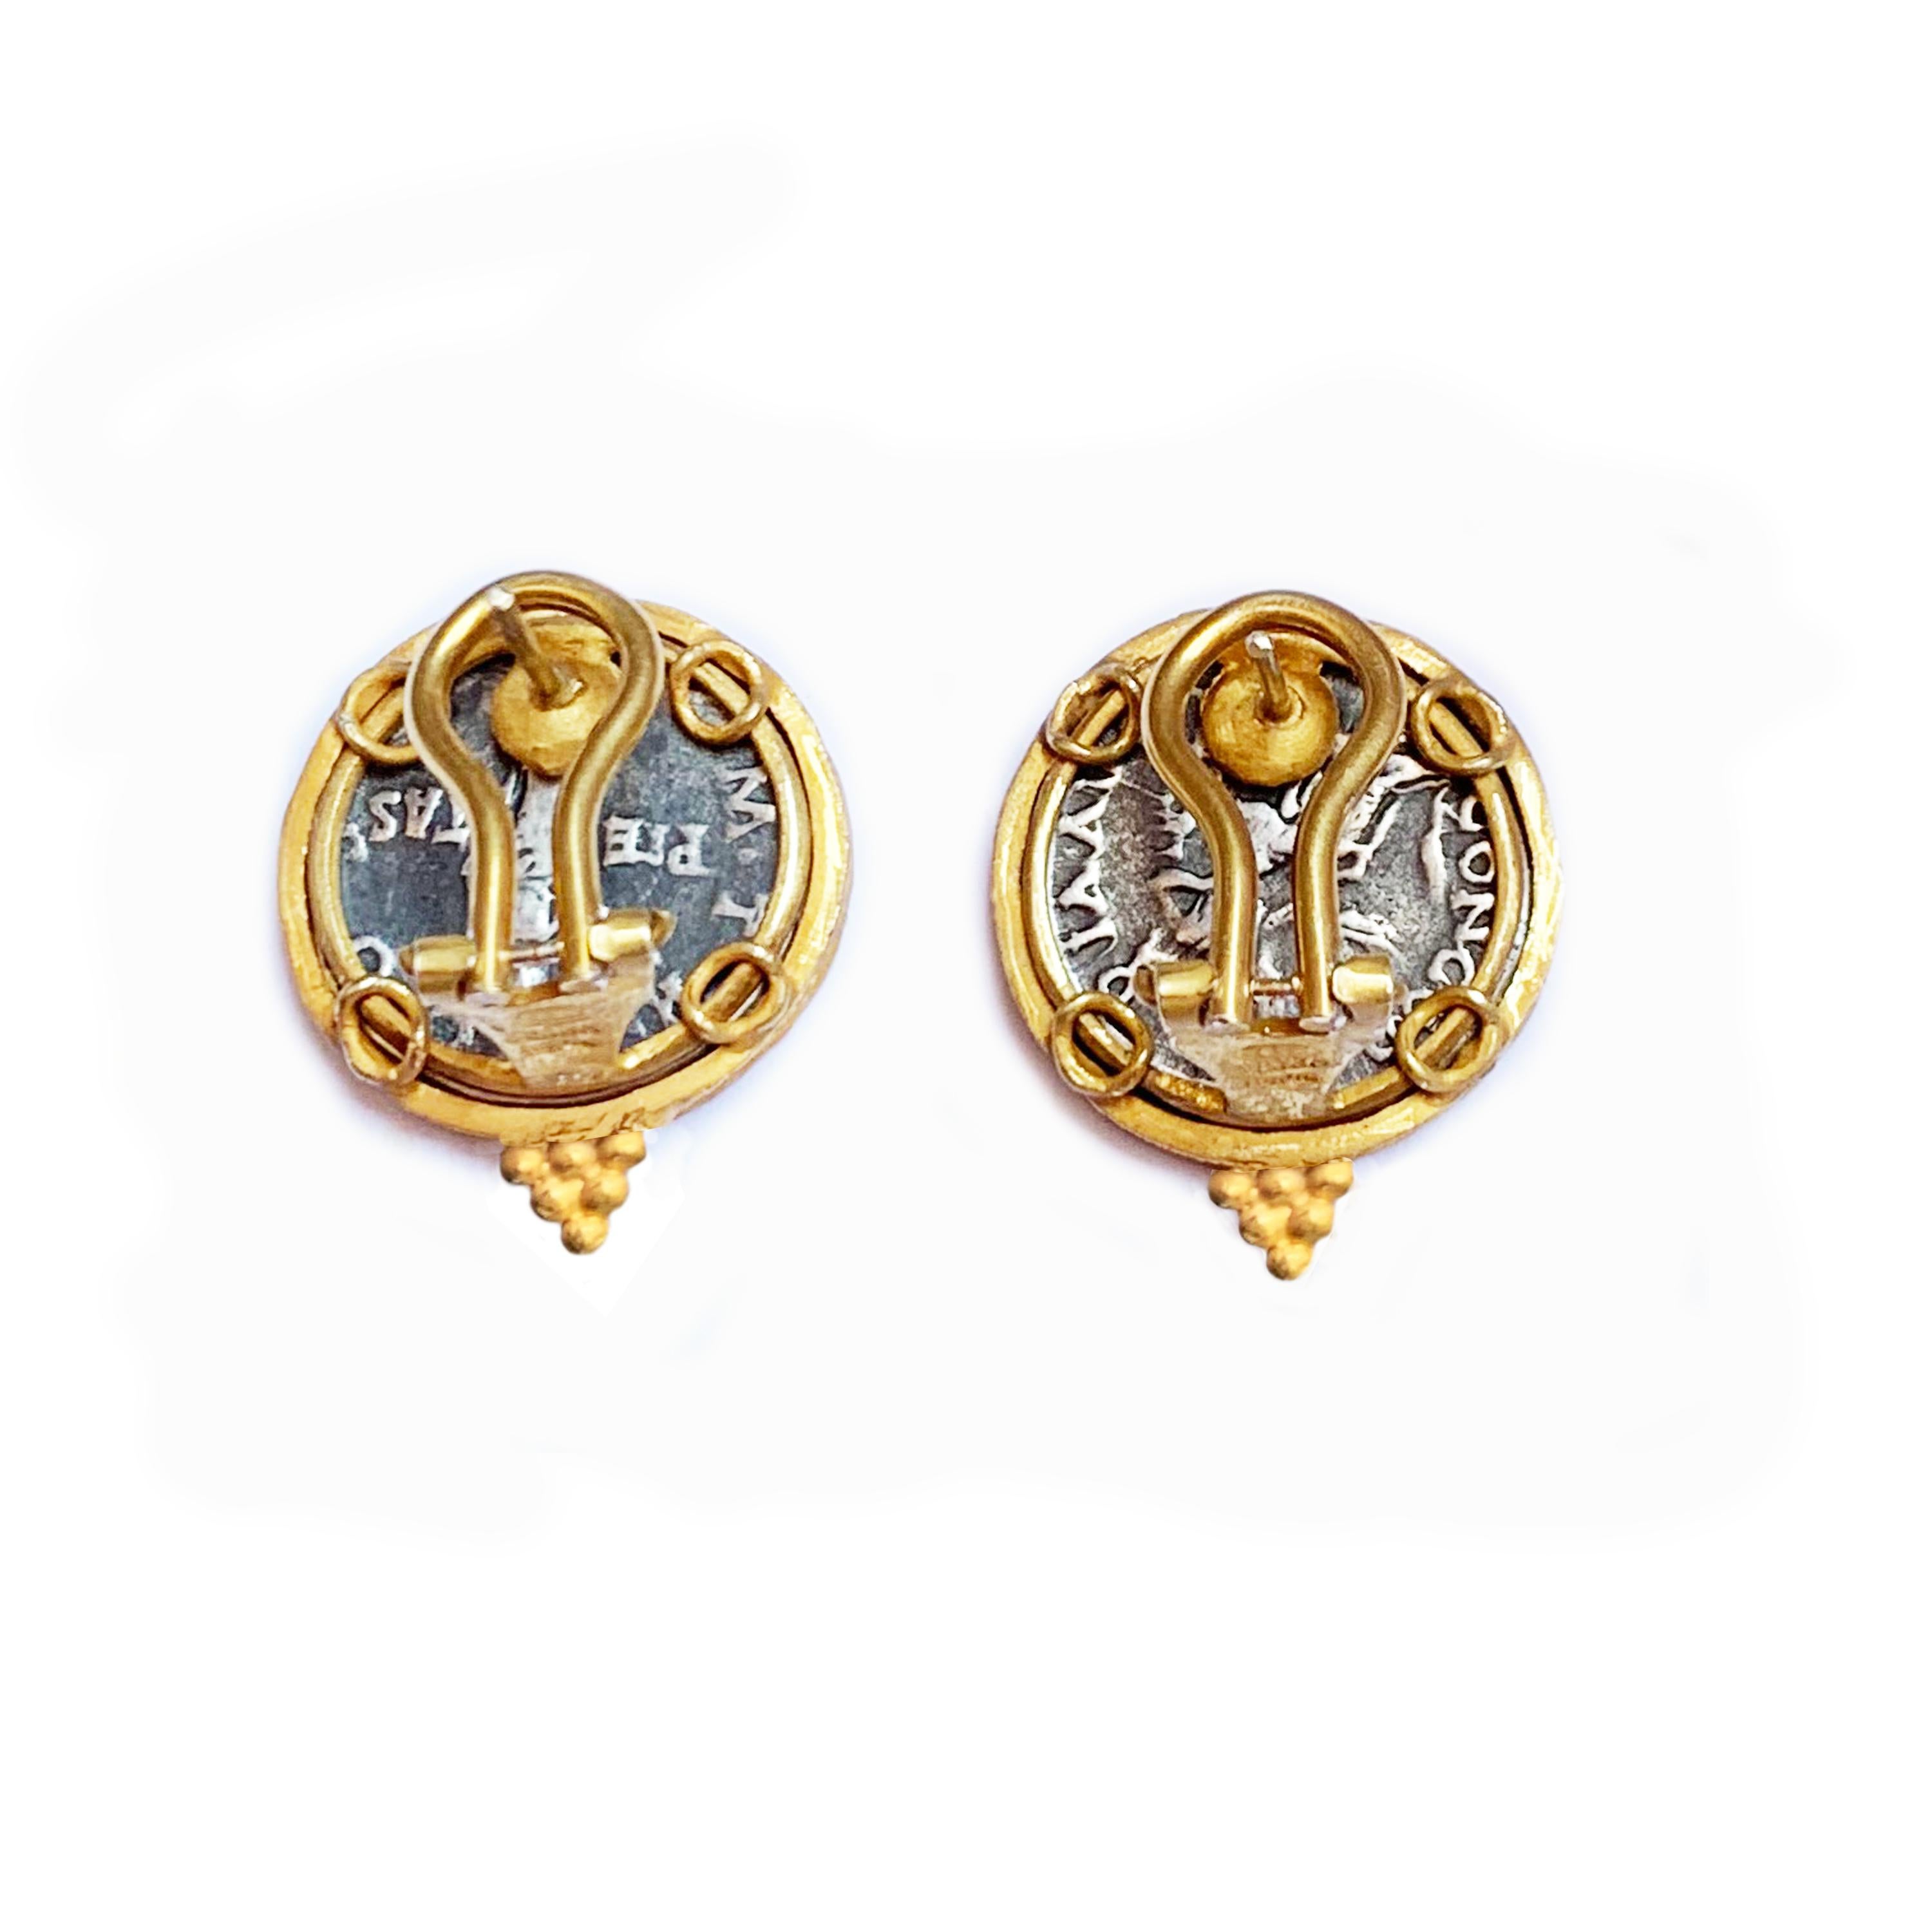 Two authentic Roman coins depicting the Emperor Hadrian and his wife Sabina have been set in these 24 Kt gilded sterling silver earrings.
Hadrian is remembered for his travels, his building projects, and his efforts to tie together the far-flung